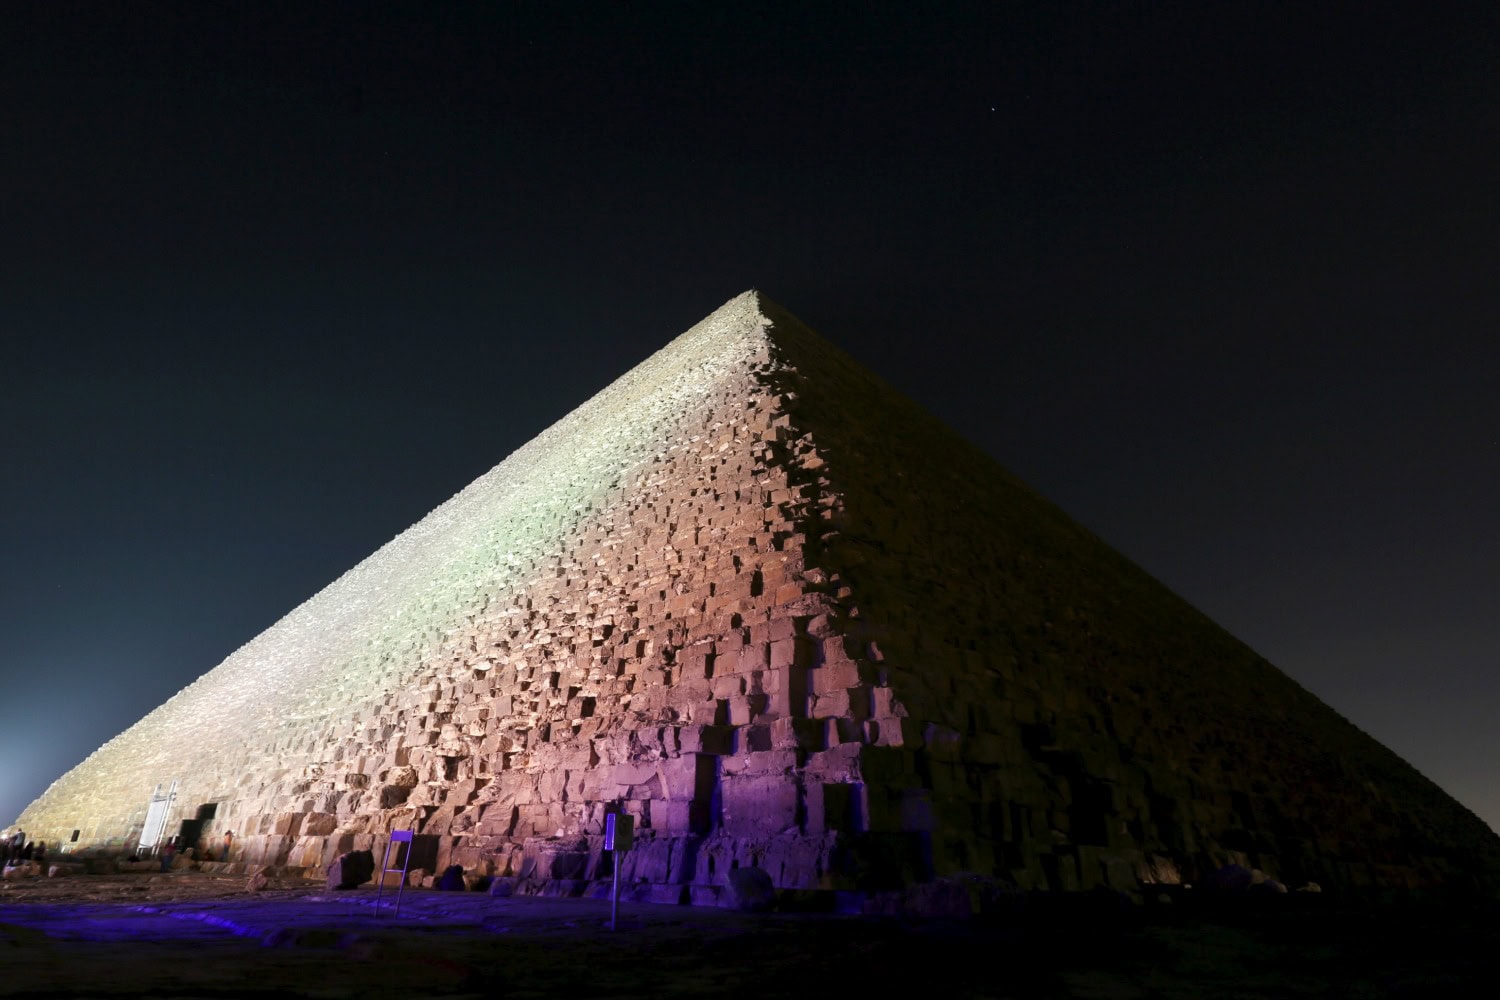 Two new hidden chambers found inside the Great Pyramid of Giza